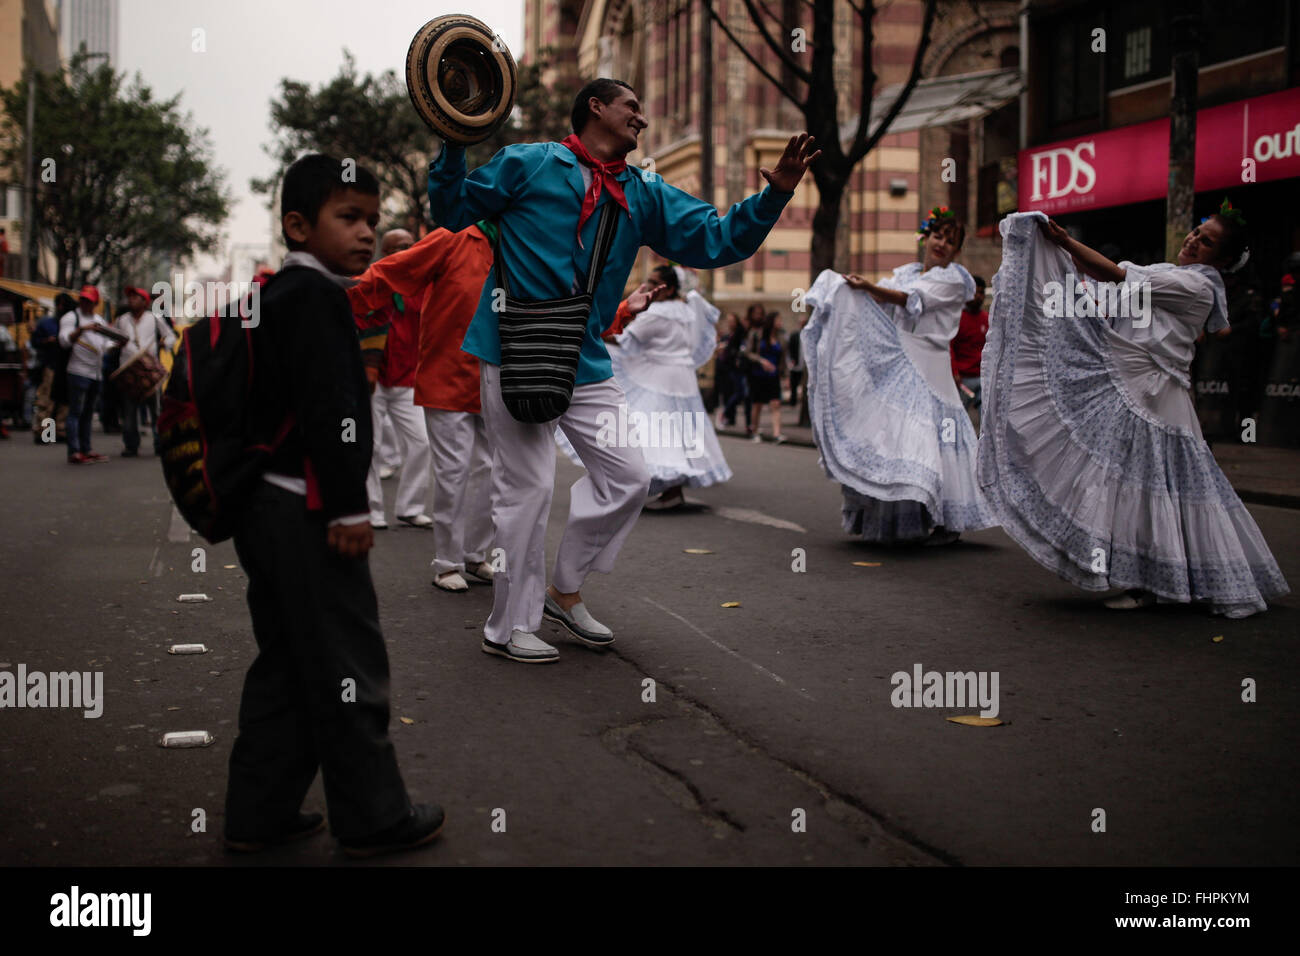 Bogota, Colombia. 25th Feb, 2016. Residents dance during a march called by student organizations and labor unions, in Bogota, capital of Colombia, on Feb. 25, 2016. Hundreds of citizens, students and leaders of labor unions demonstrated against the value-added tax increase, the low increase to minimum wage, the mishandling of higher education and the sale of national companies. © Jhon Paz/Xinhua/Alamy Live News Stock Photo